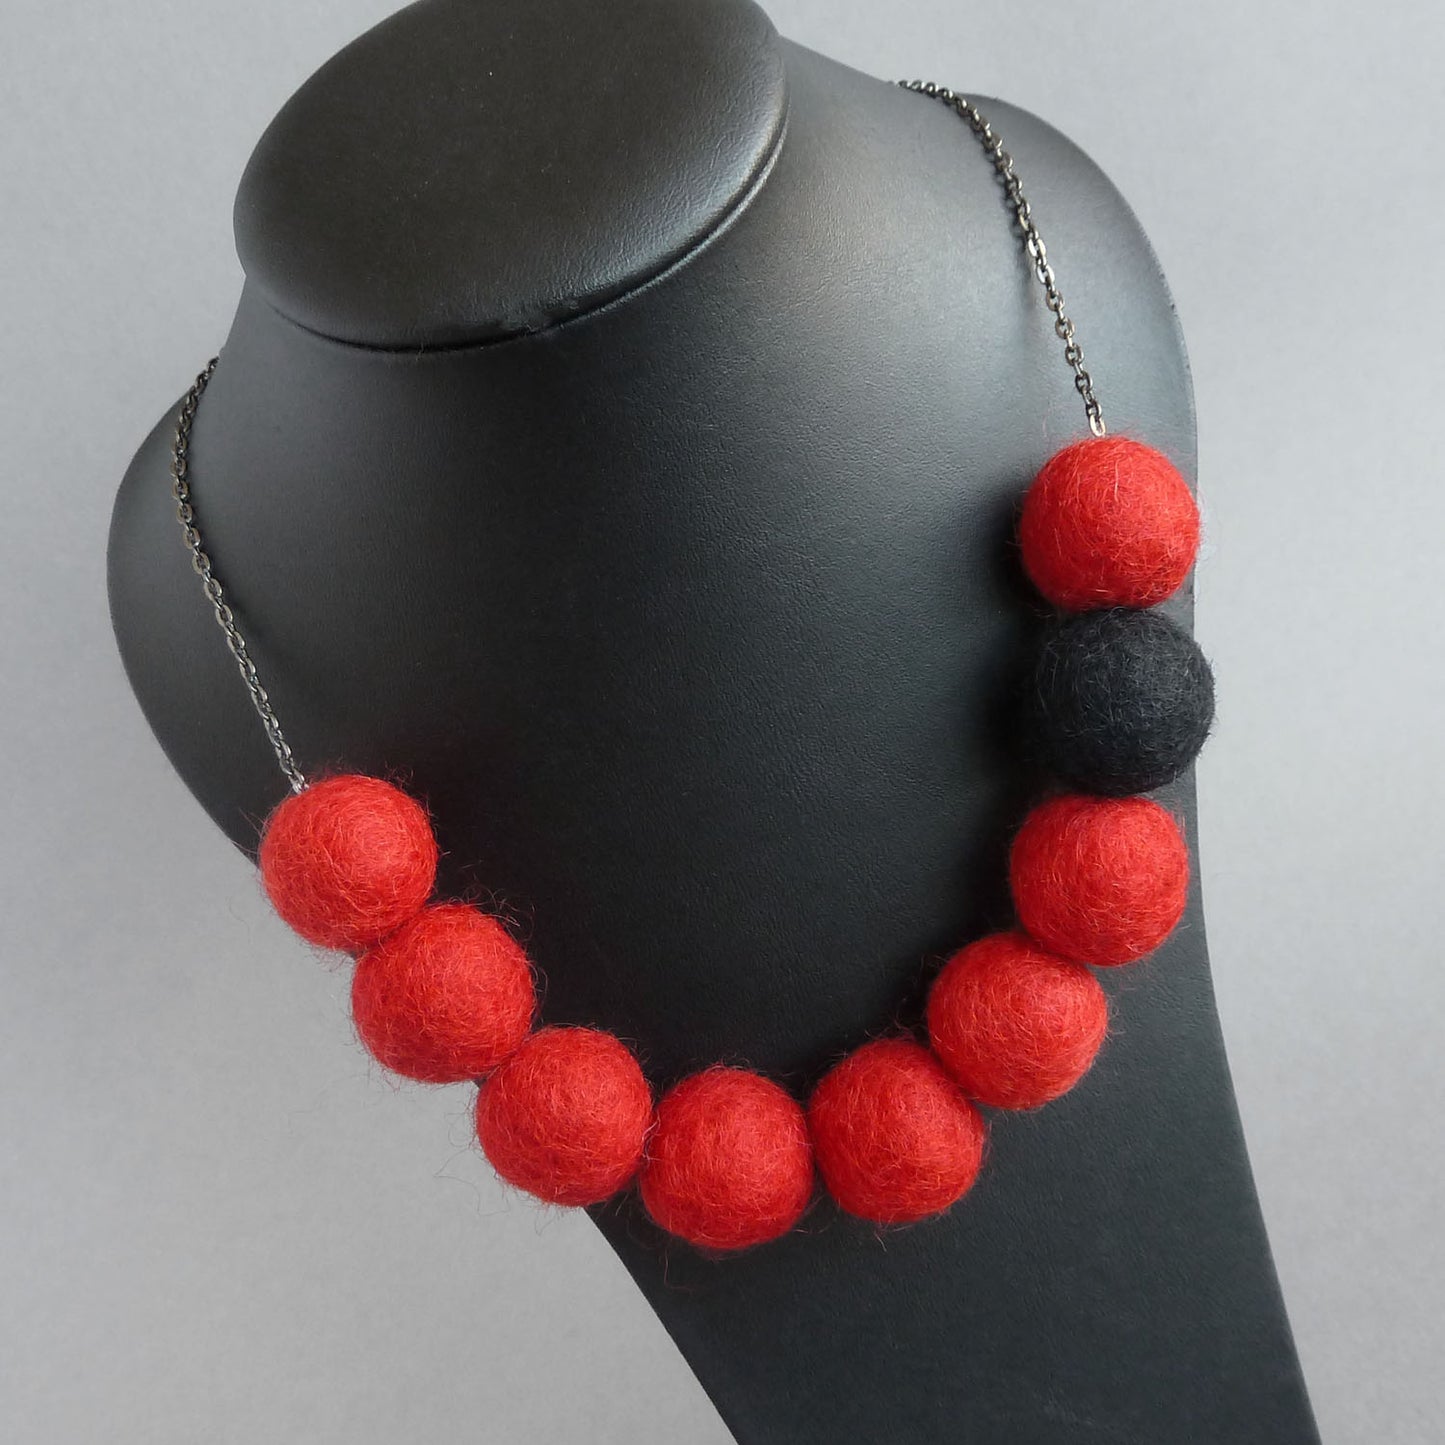 Chunky red and black felt necklace